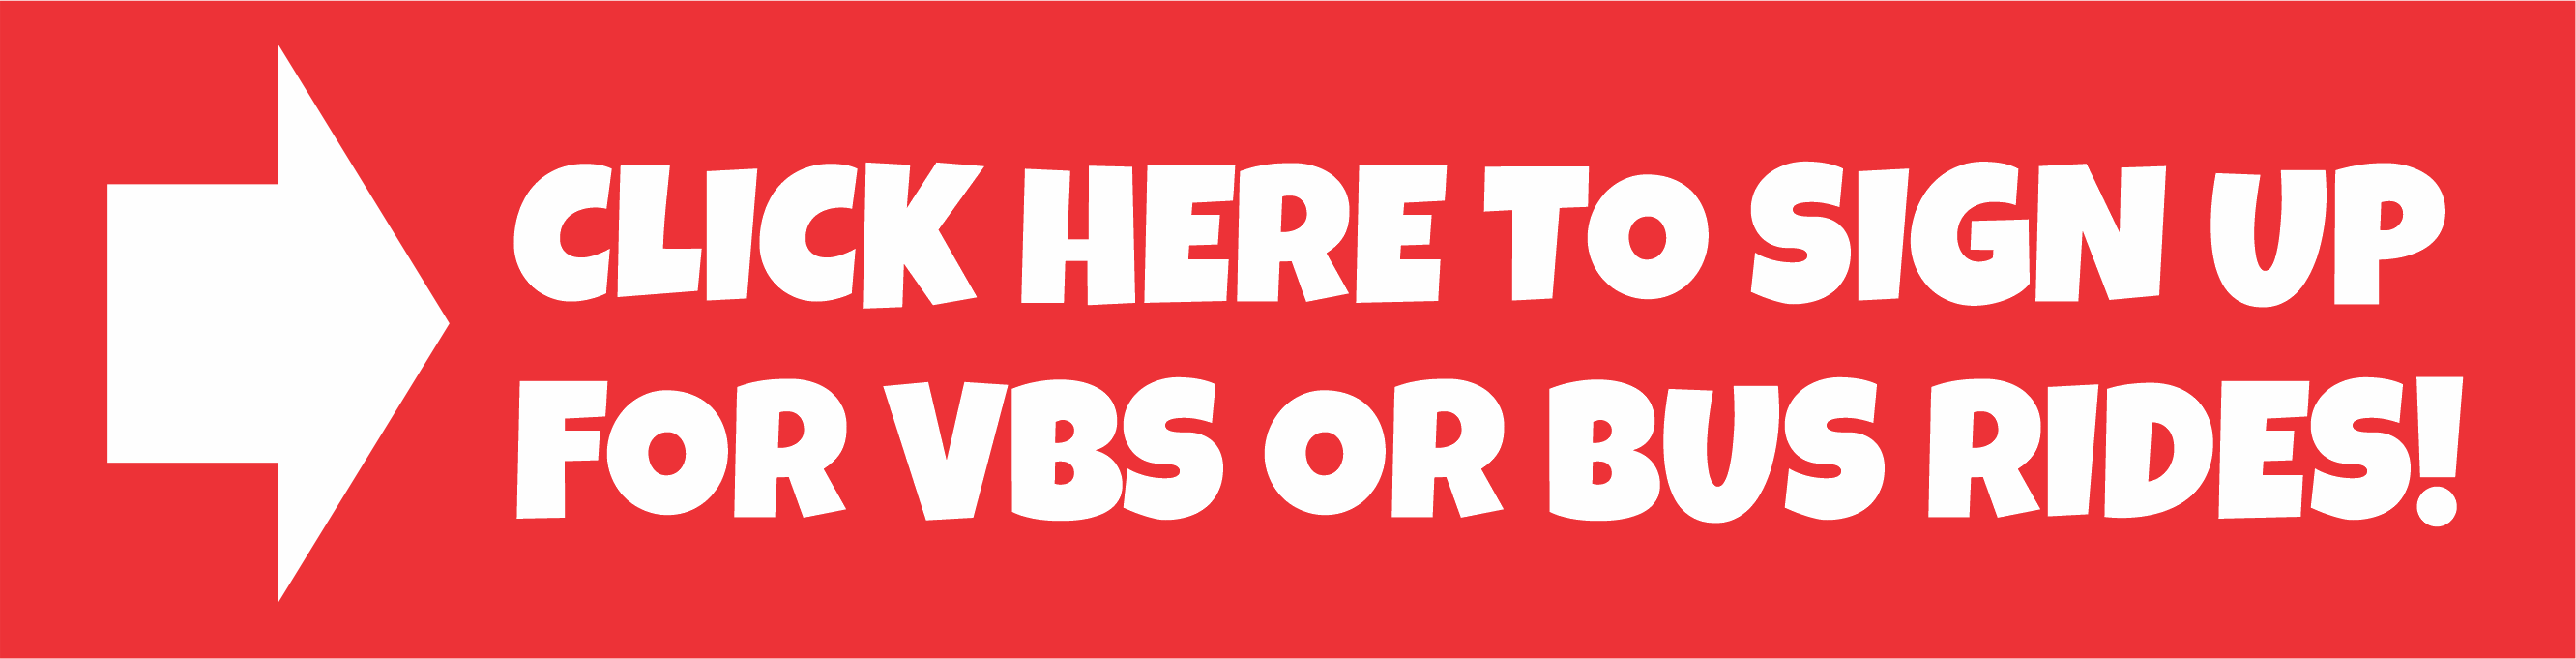 24 CLICK HERE VBS